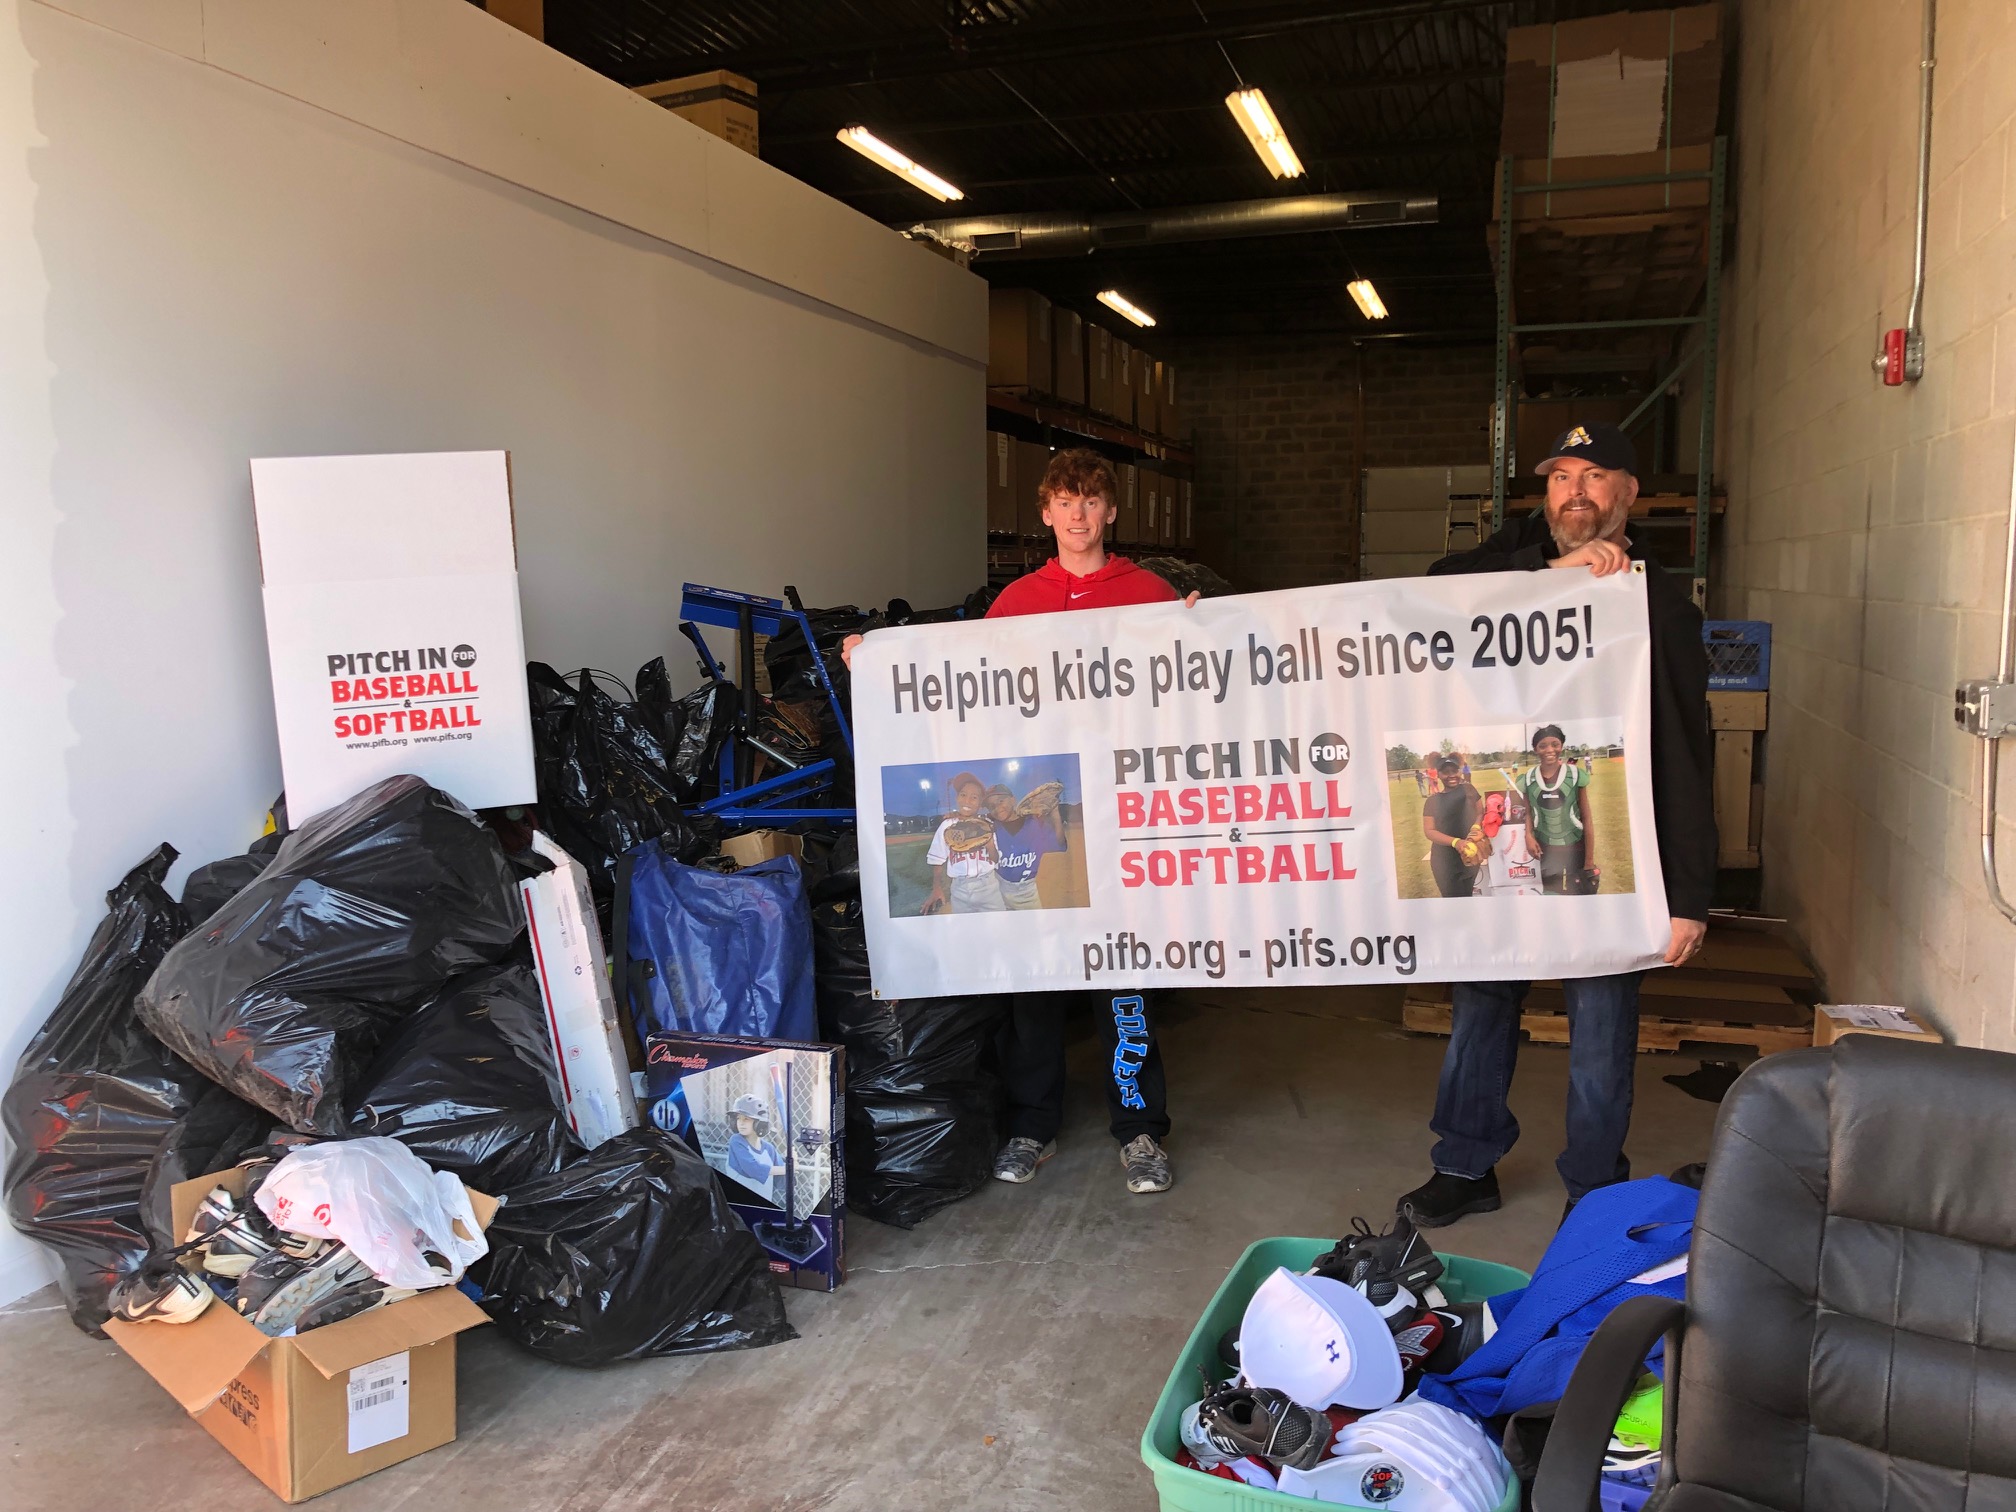 Peter Johnson Collects 1,500 Pieces of Equipment For Eagle Scout Project